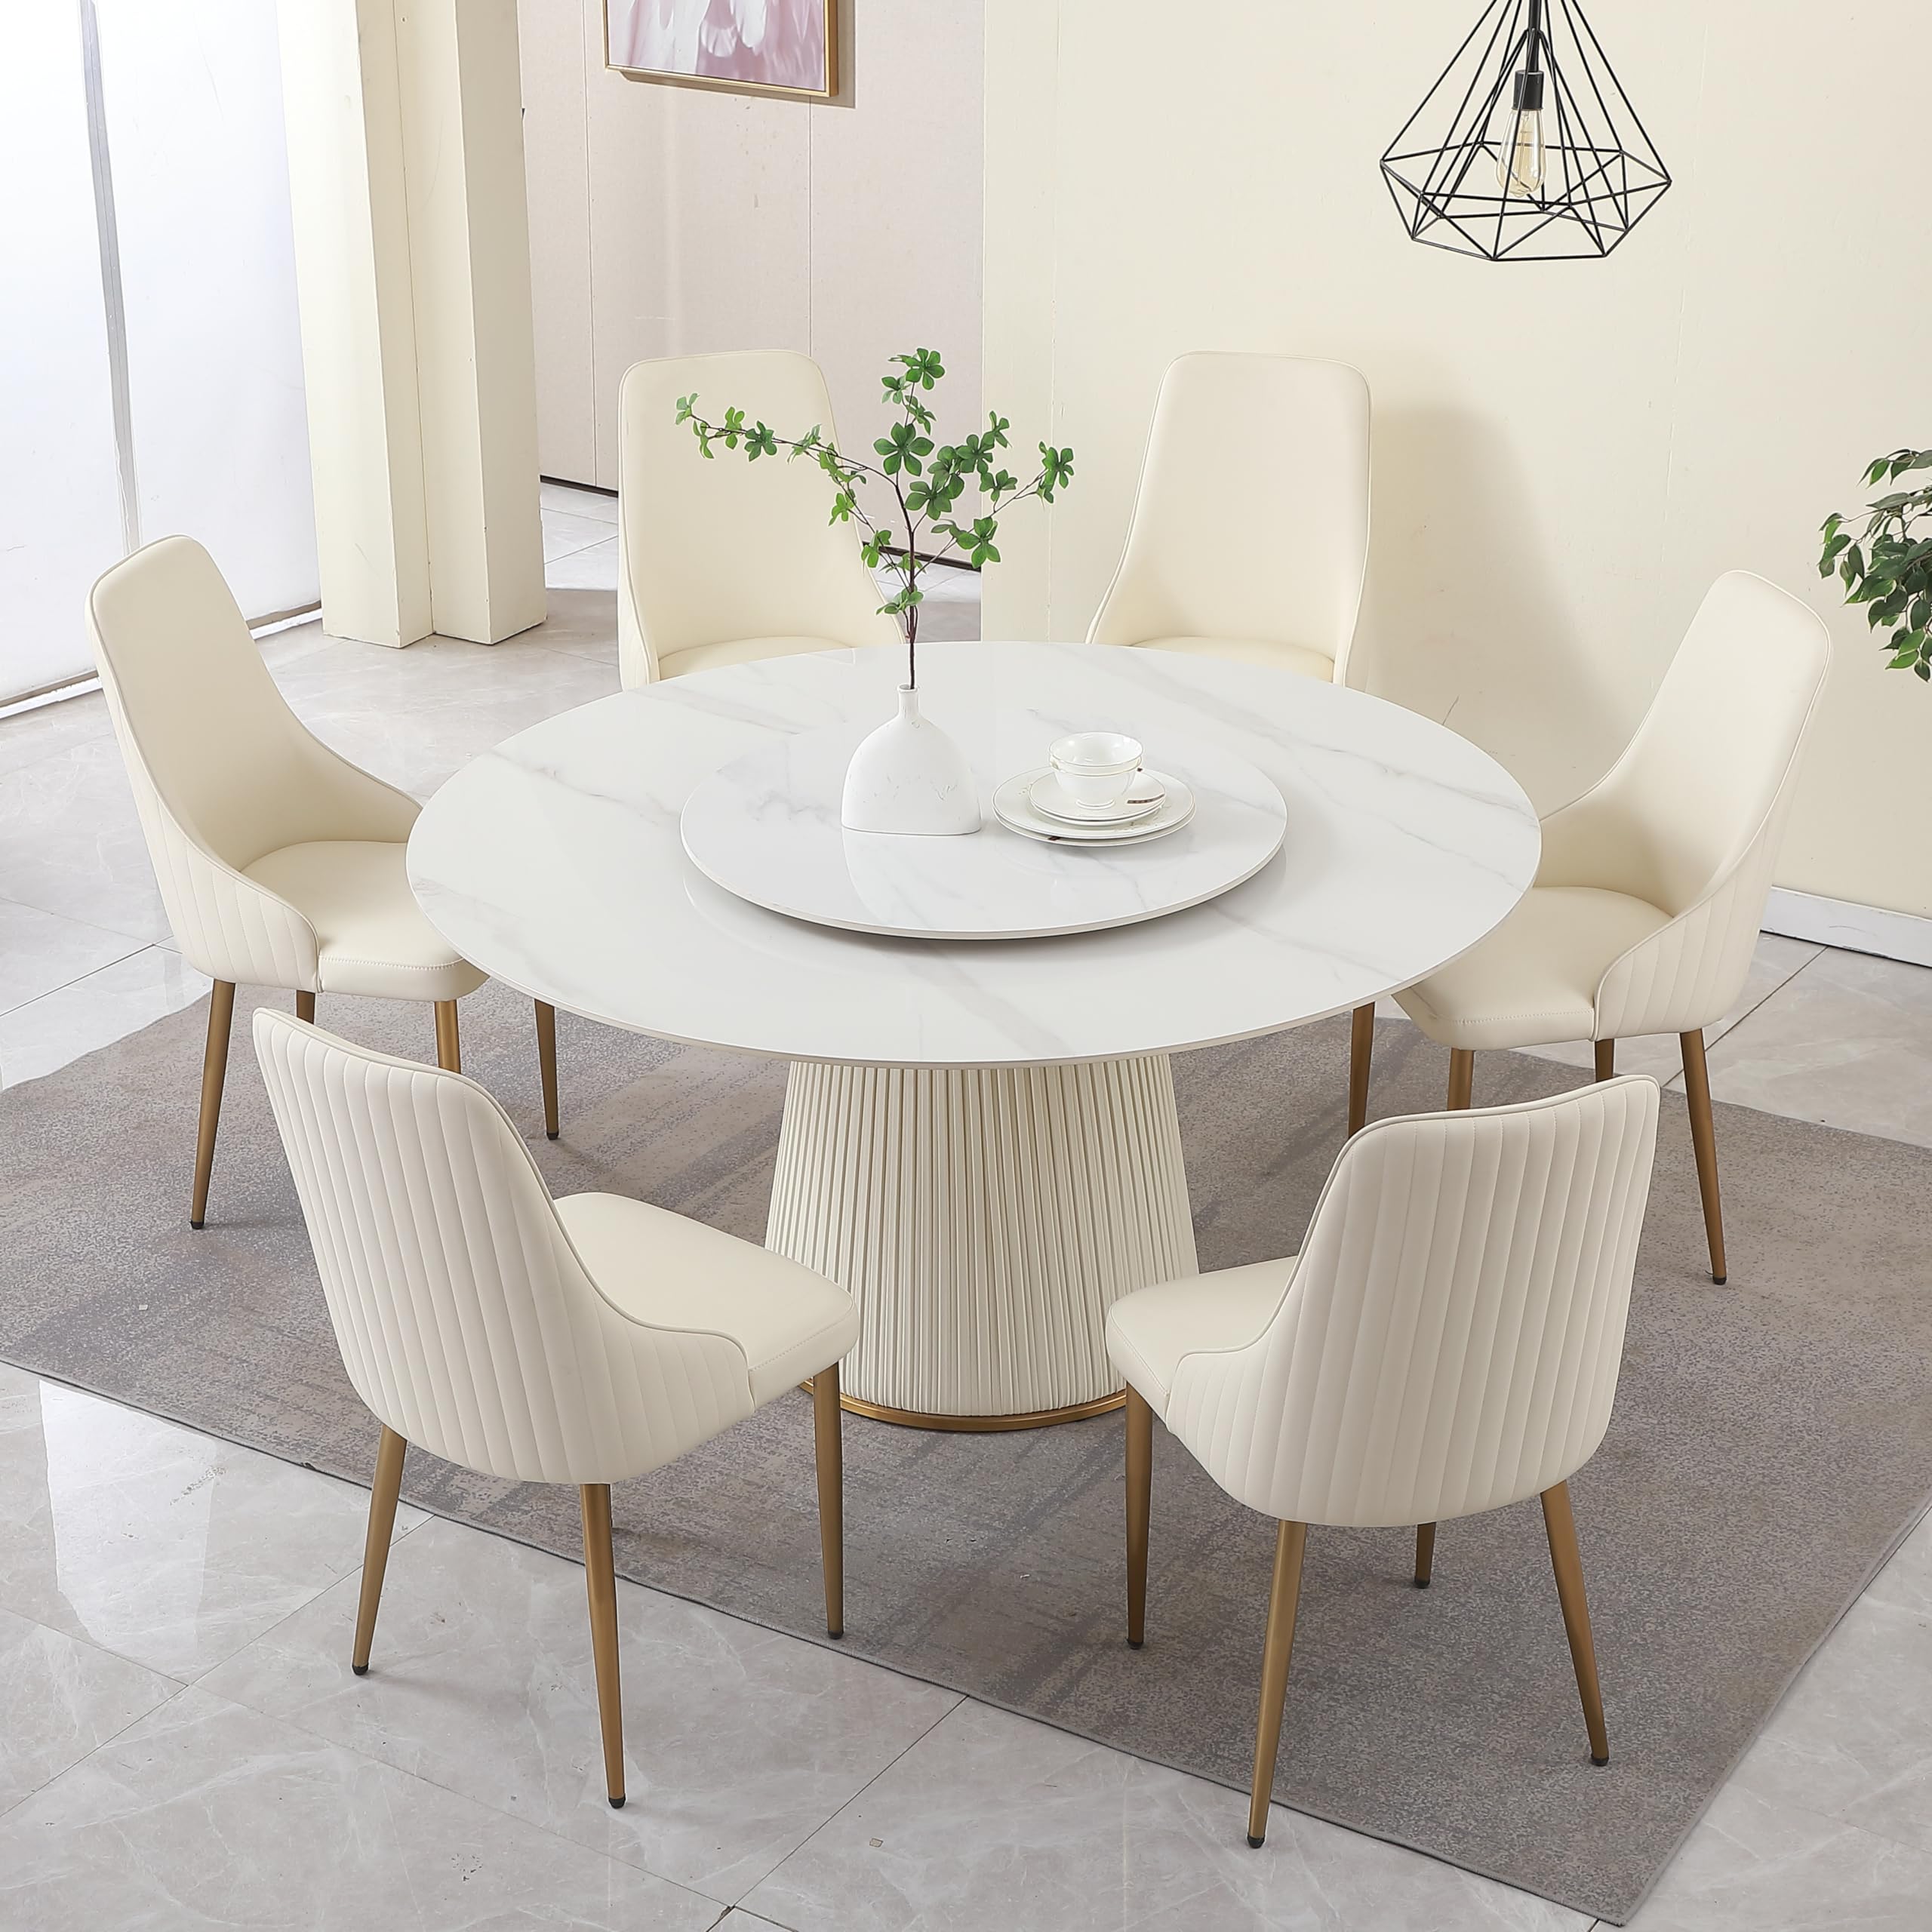 Montary 59.05" Modern Sintered Stone Round Dining Table with 31.5" Round Turntable